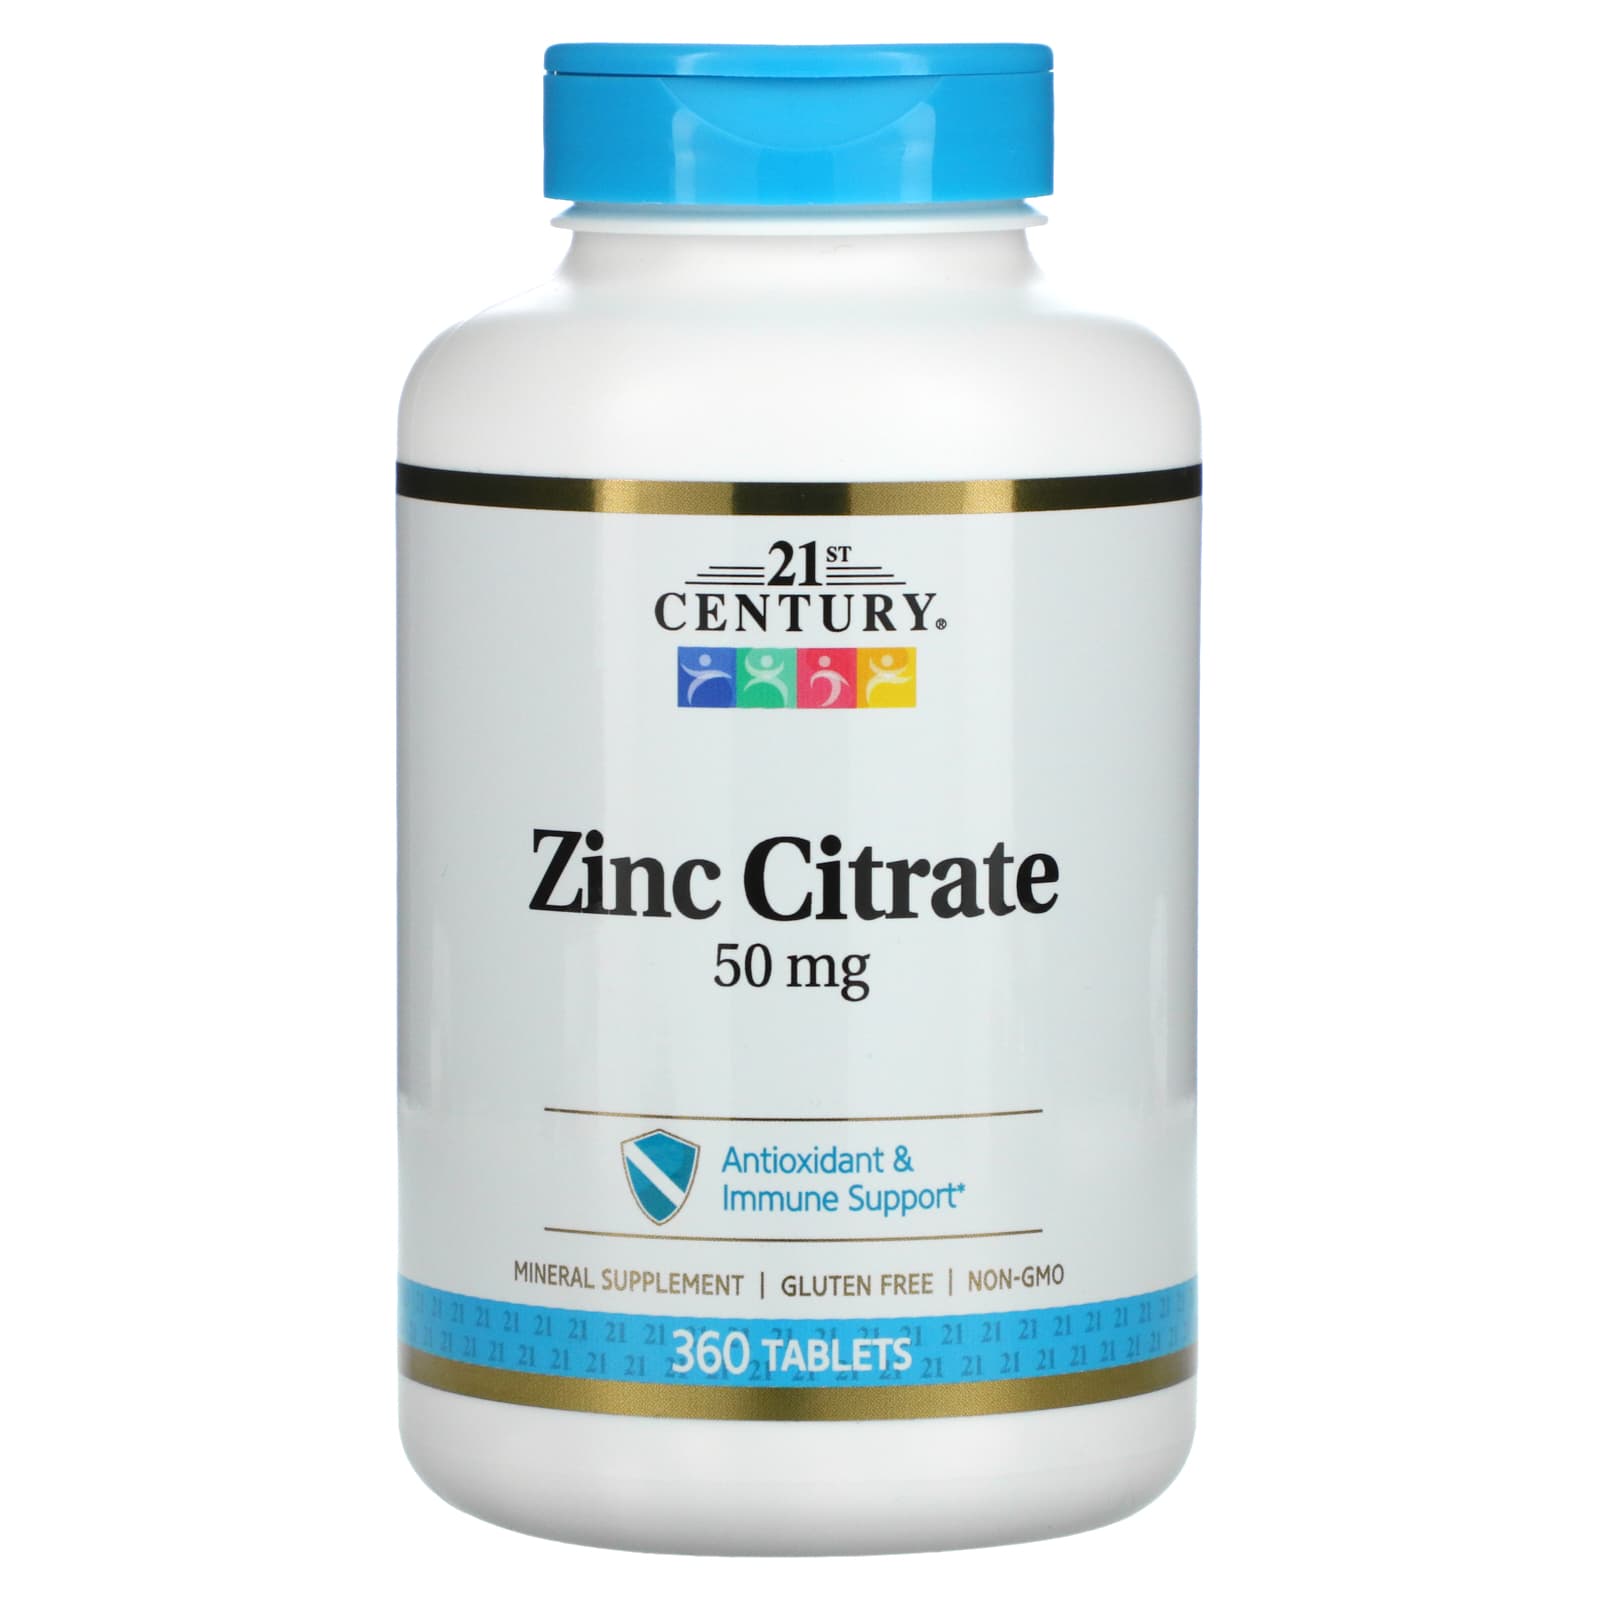 21st Century-Zinc Citrate-50 mg-360 Tablets